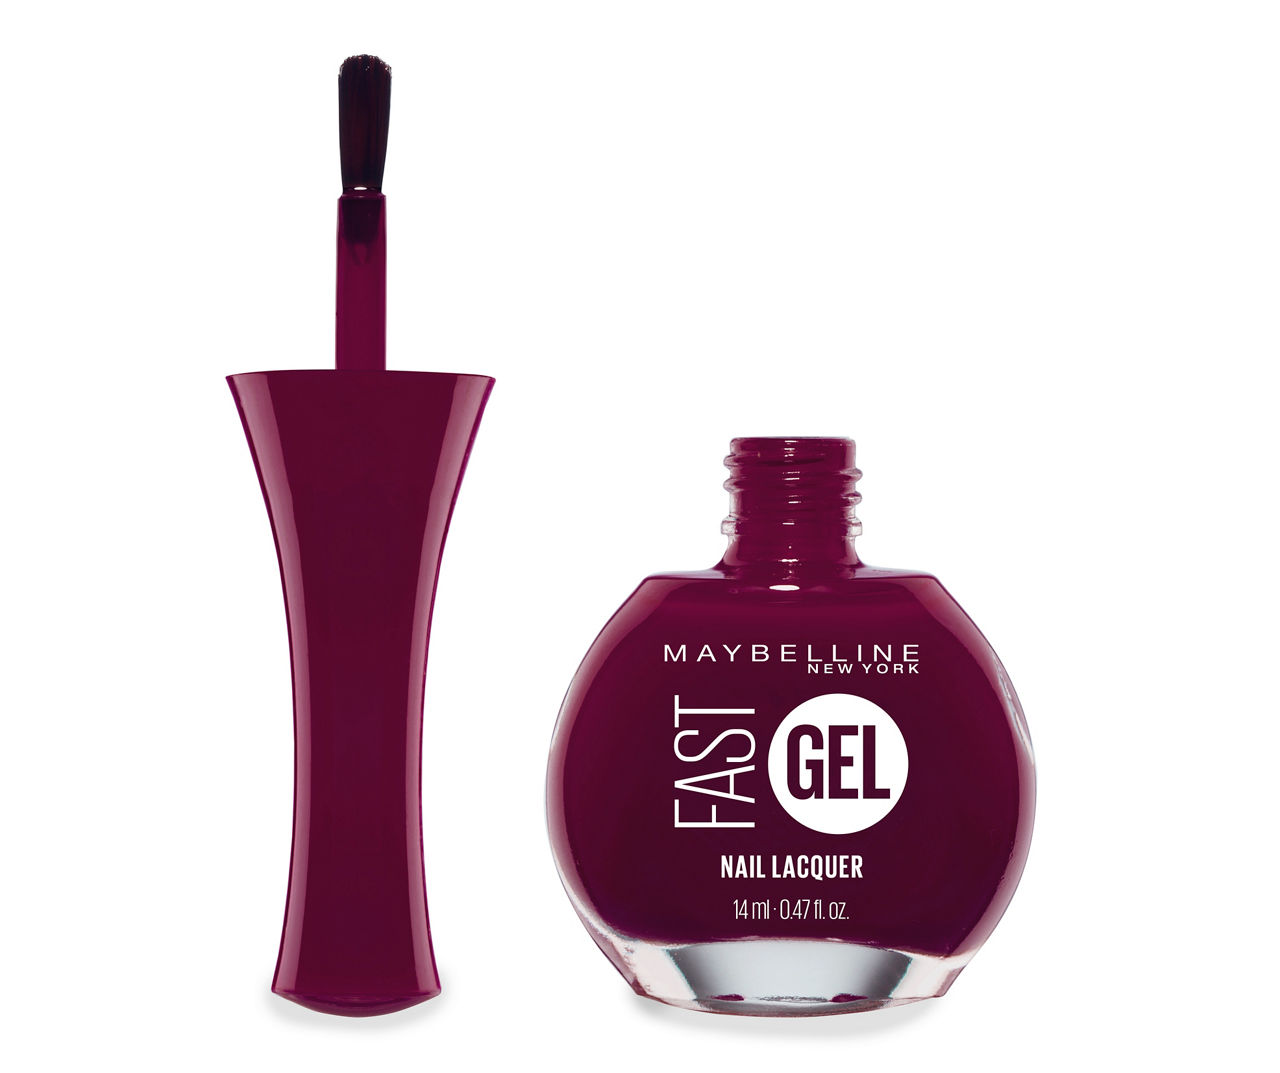 Nail Big Maybelline Lots 0.47 Gel Lacquer, Oz. |